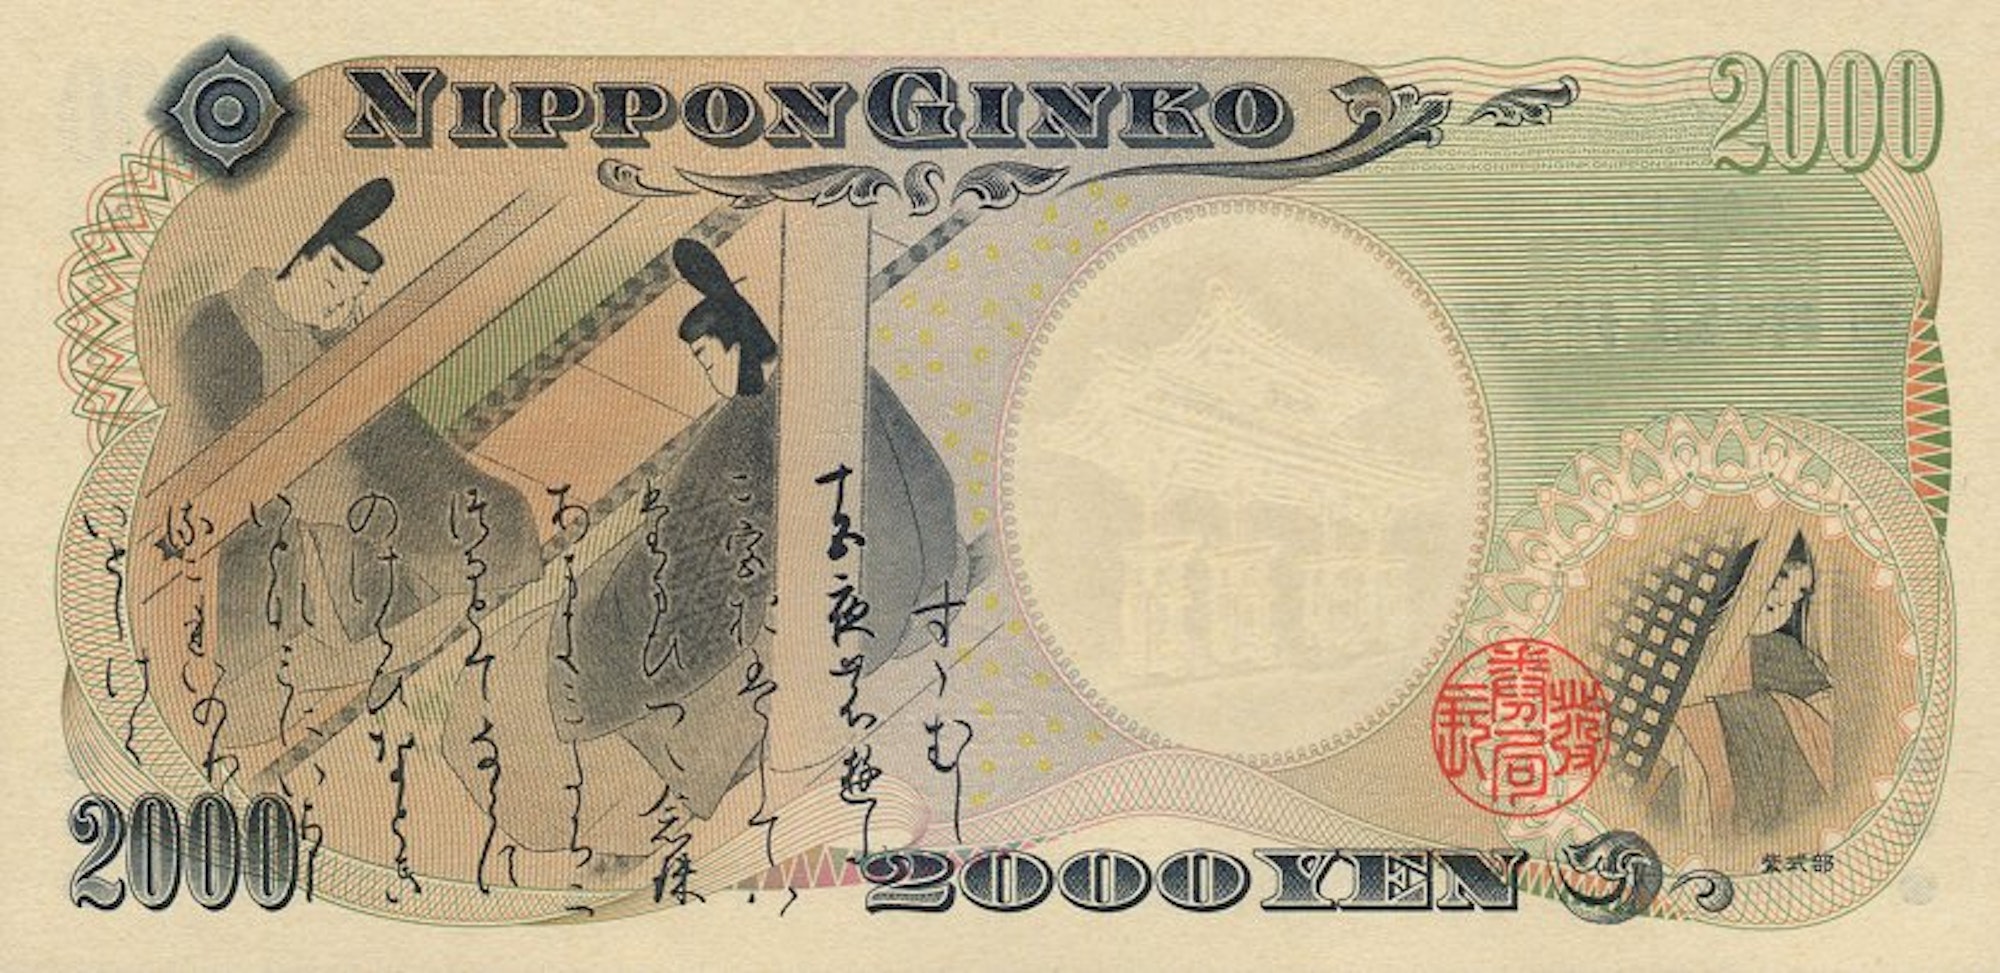 A 2000 Yen bank note with ancient Japanese illustration